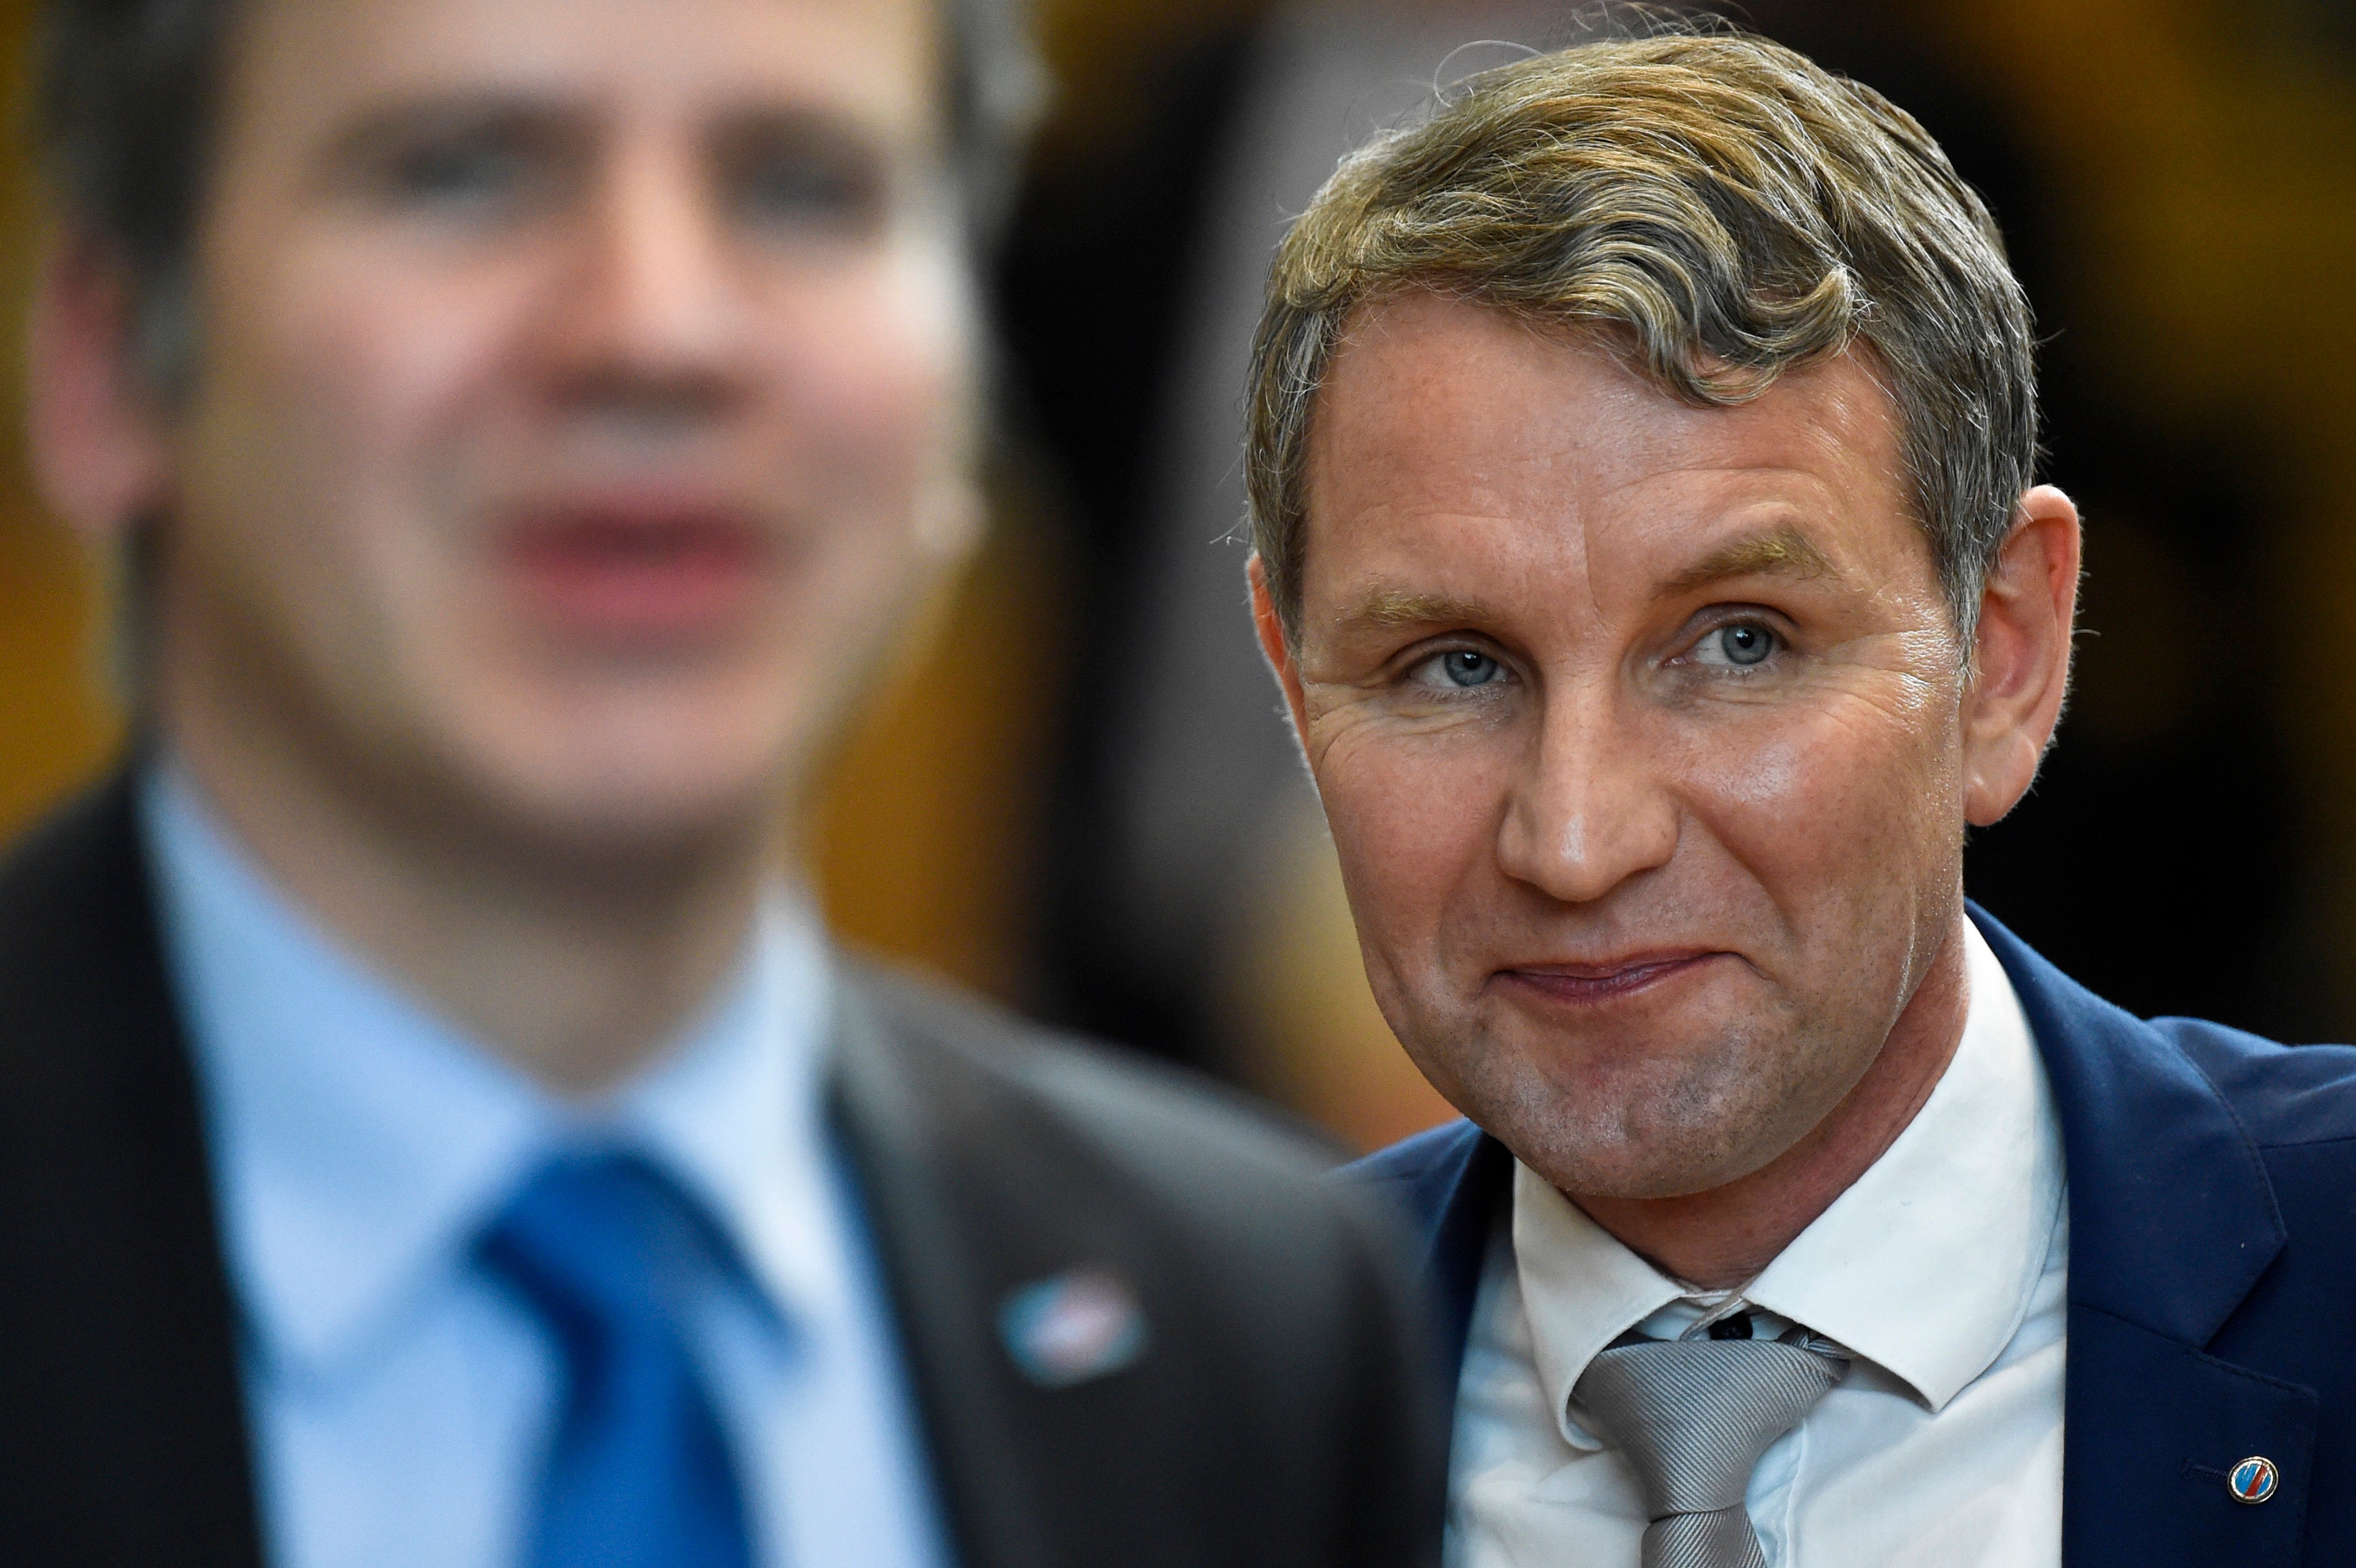 AfD’s regional leader Björn Höcke, a charismatic 52-year-old former history teacher, is on course to be the next governor of Thuringia